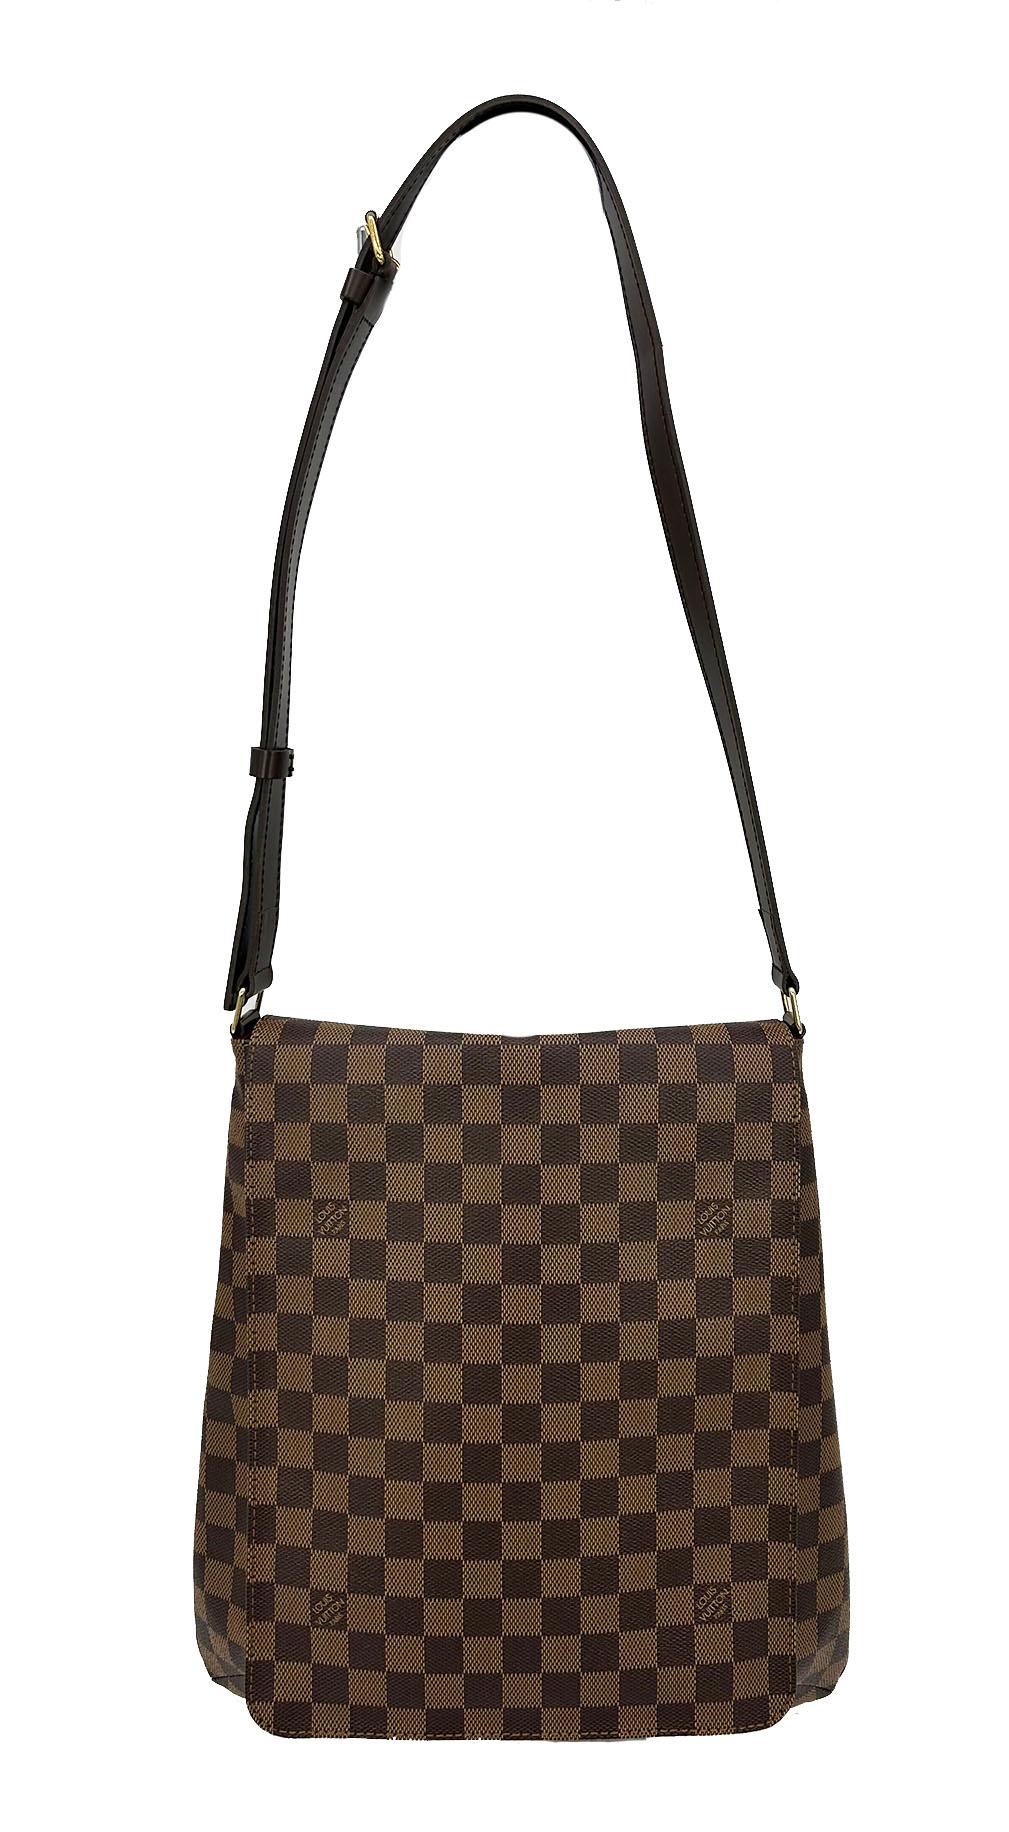 Louis Vuitton Damier Ebene Musette Salsa GM Shoulder Bag in very good condition. Dark brown checkered damier ebene canvas with signature Louis Vuitton logo throughout. Dark brown leather and gold brass hardware. adjustable leather shoulder strap